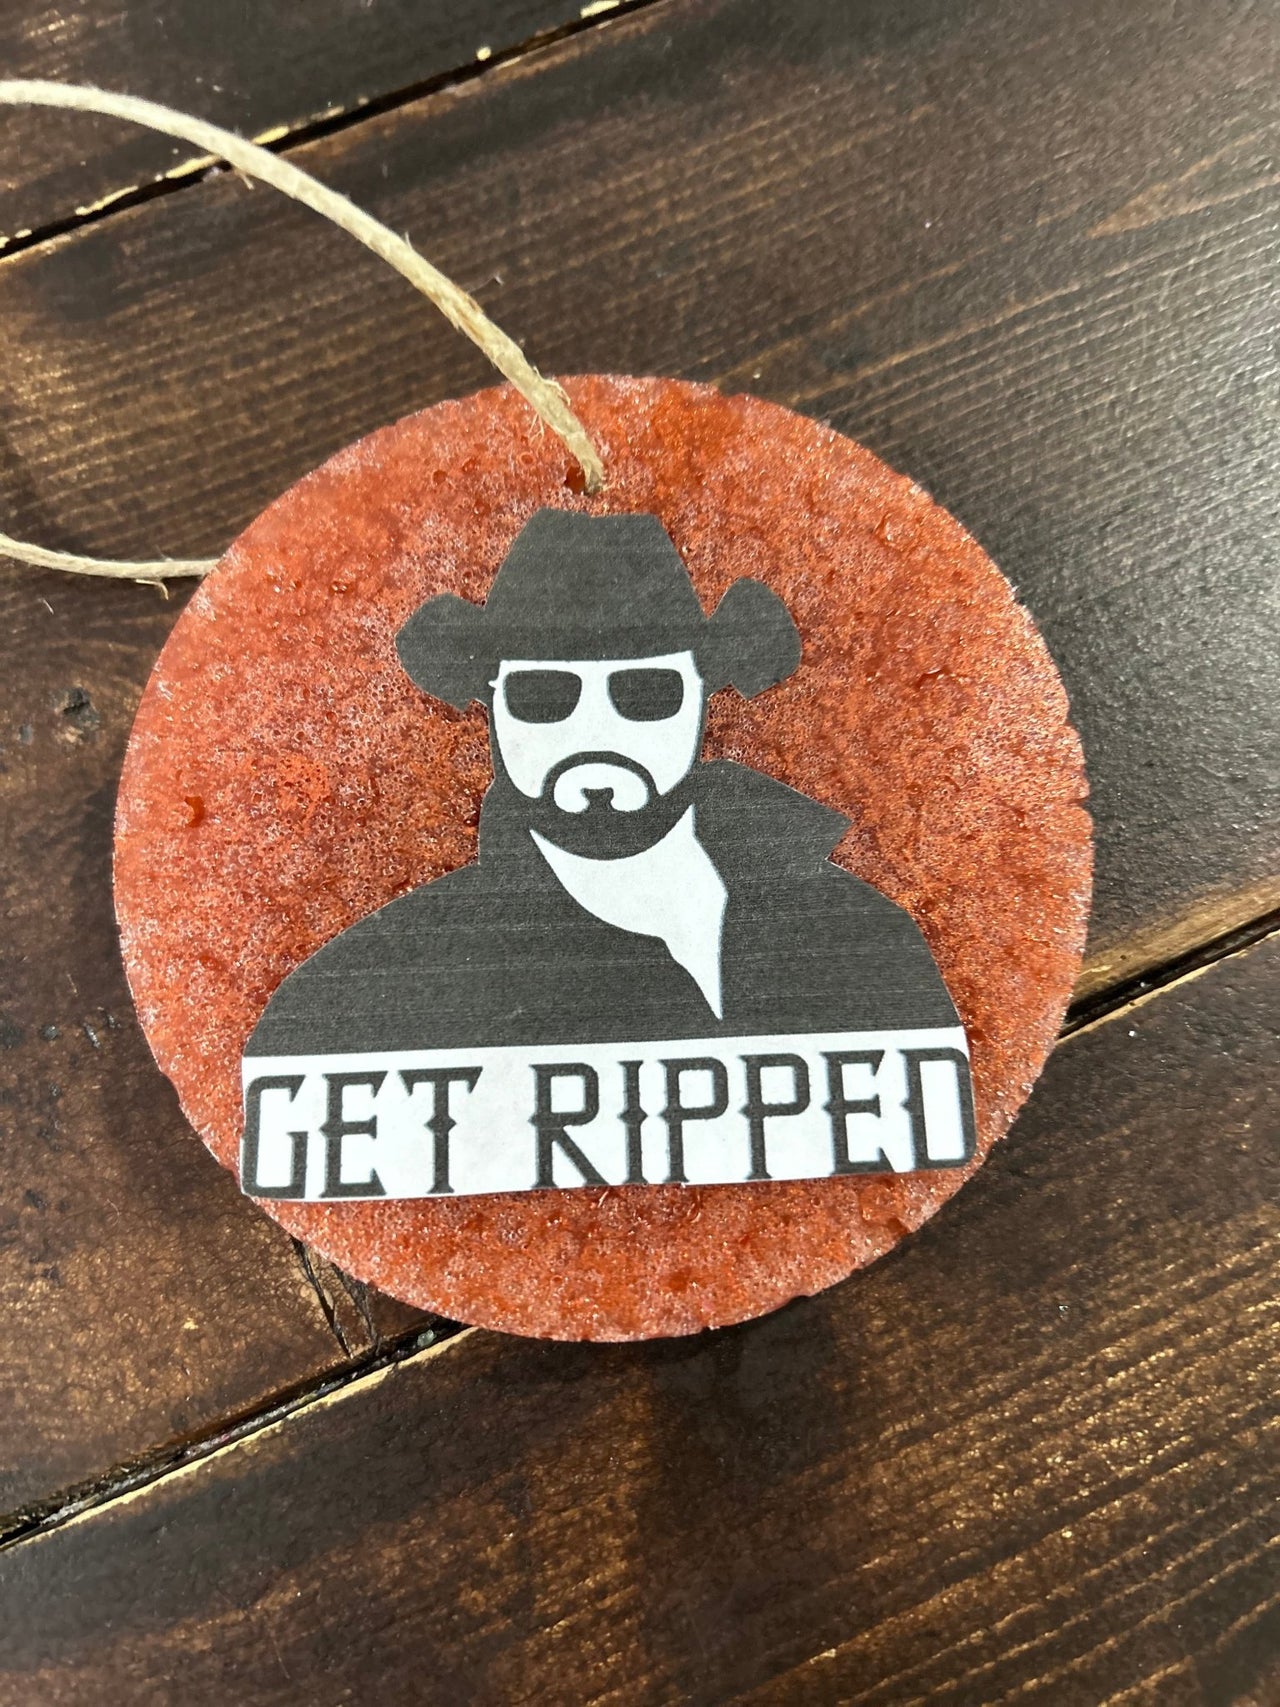 Get Ripped Car Freshie (Butt naked) - Hey Heifer Boutique